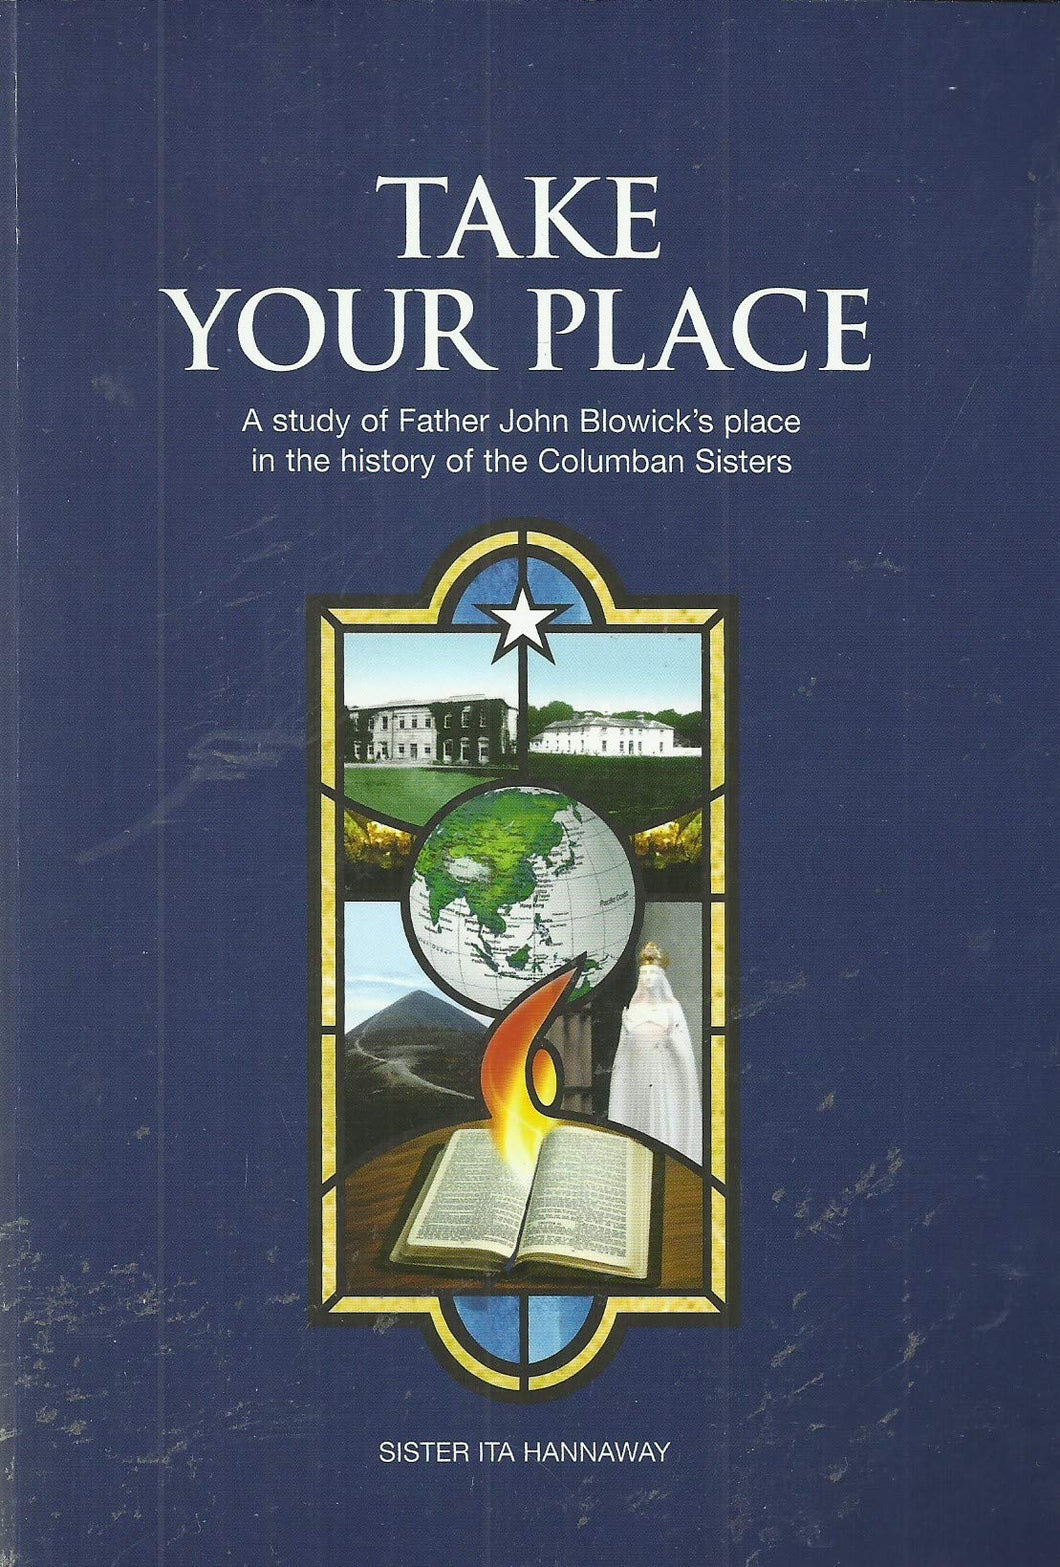 Take Your Place: A Study of Father John Blowick's Place in the History of the Columban Sisters